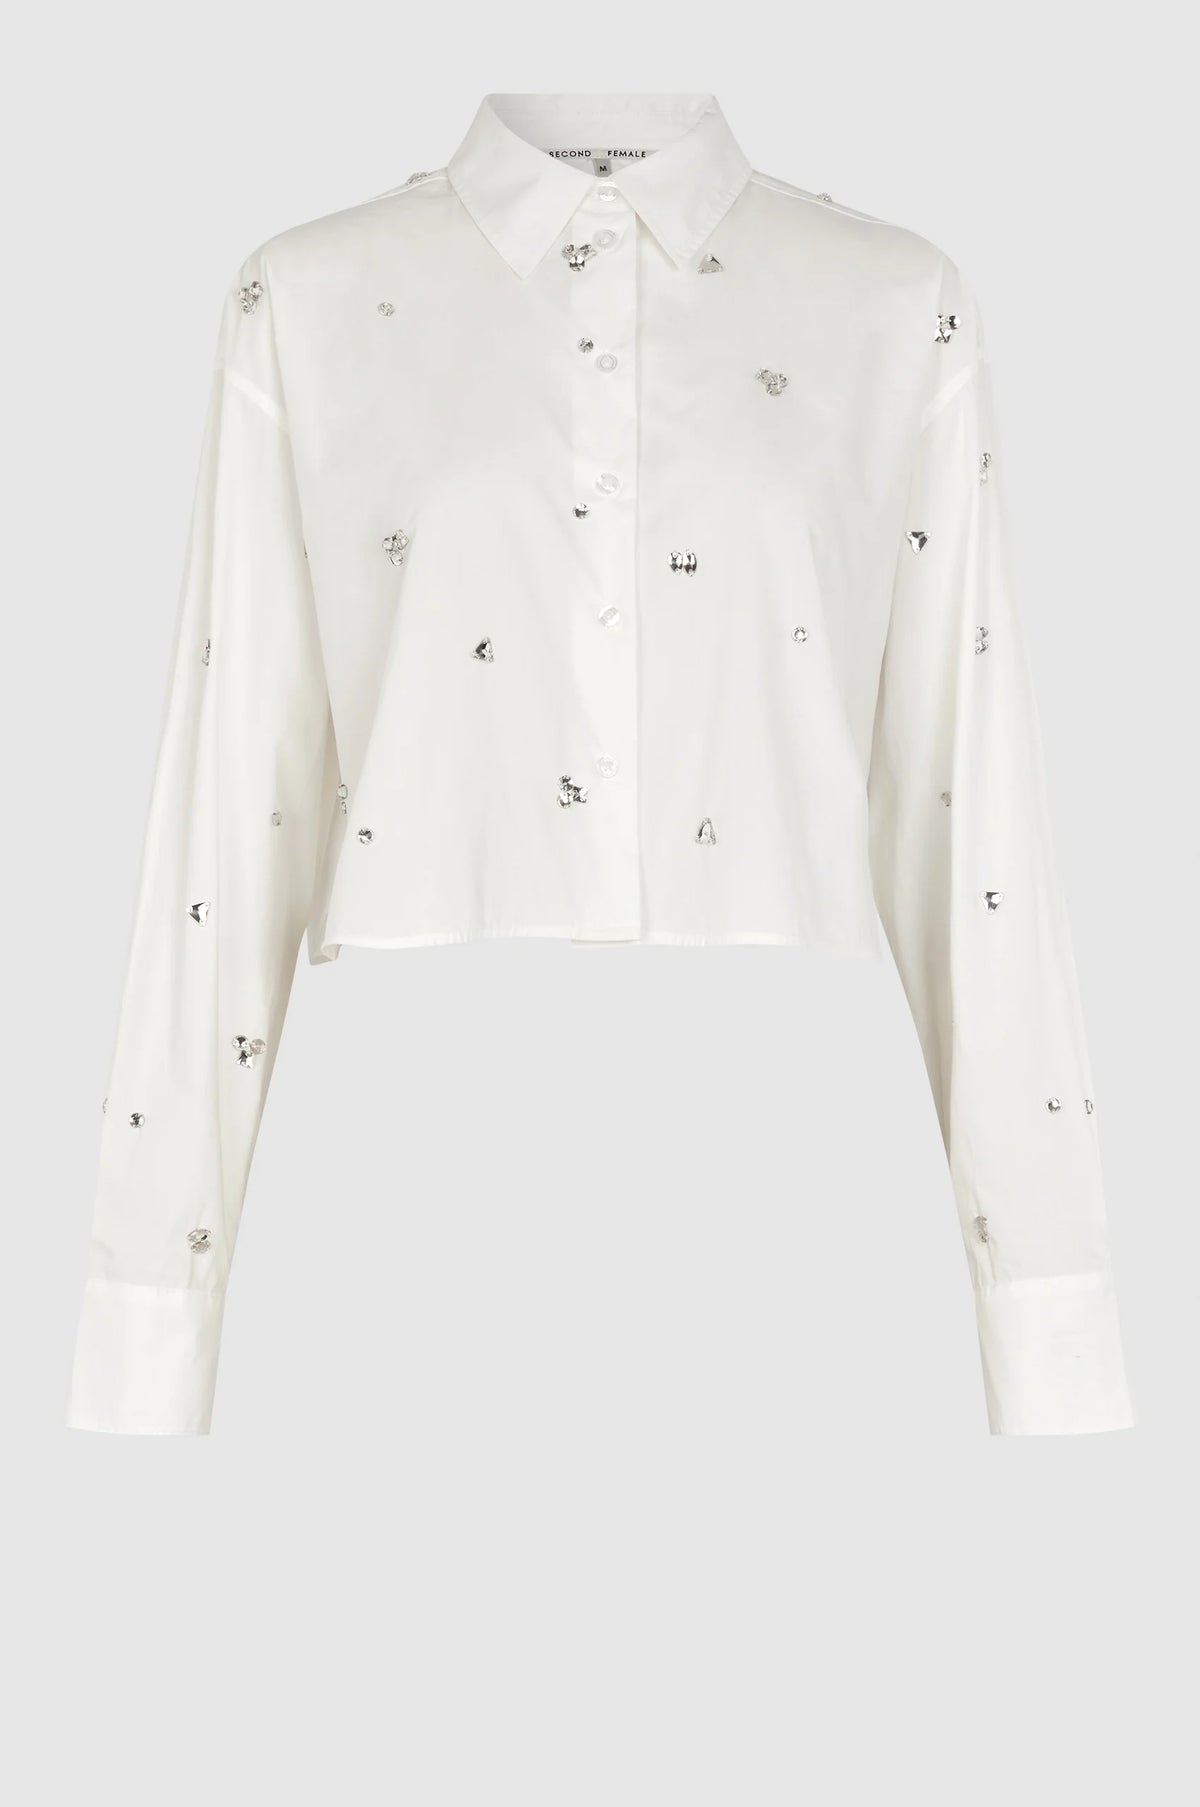 Cropped boxy white long sleeved shirt with scattered sewn on chunky gems